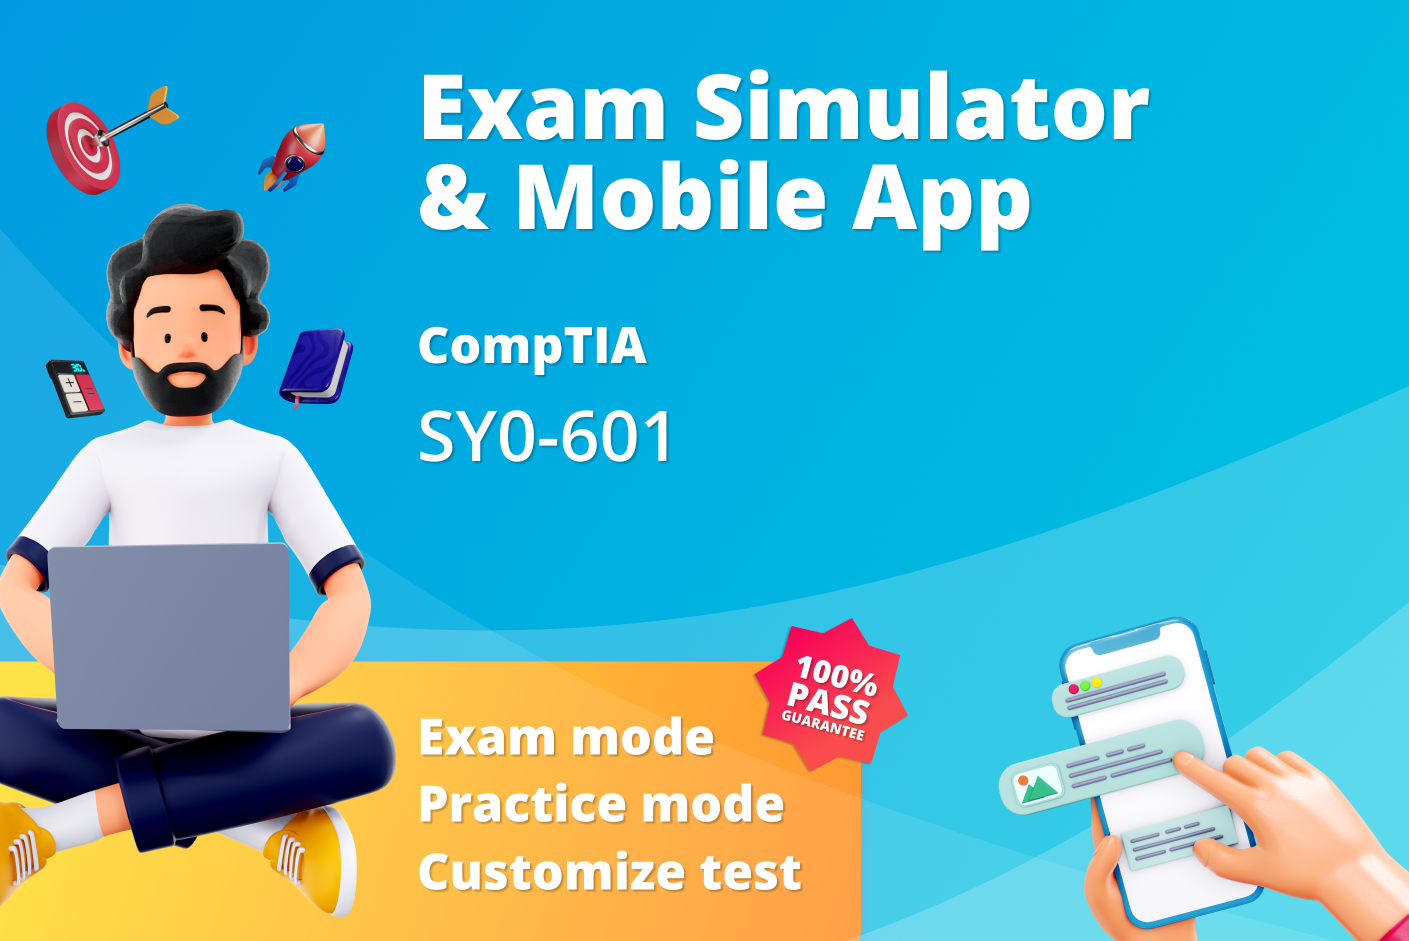 SY0-601 mock exams: Enhance UK cybersecurity skills with comprehensive practice tests for the CompTIA SY0-601 certification